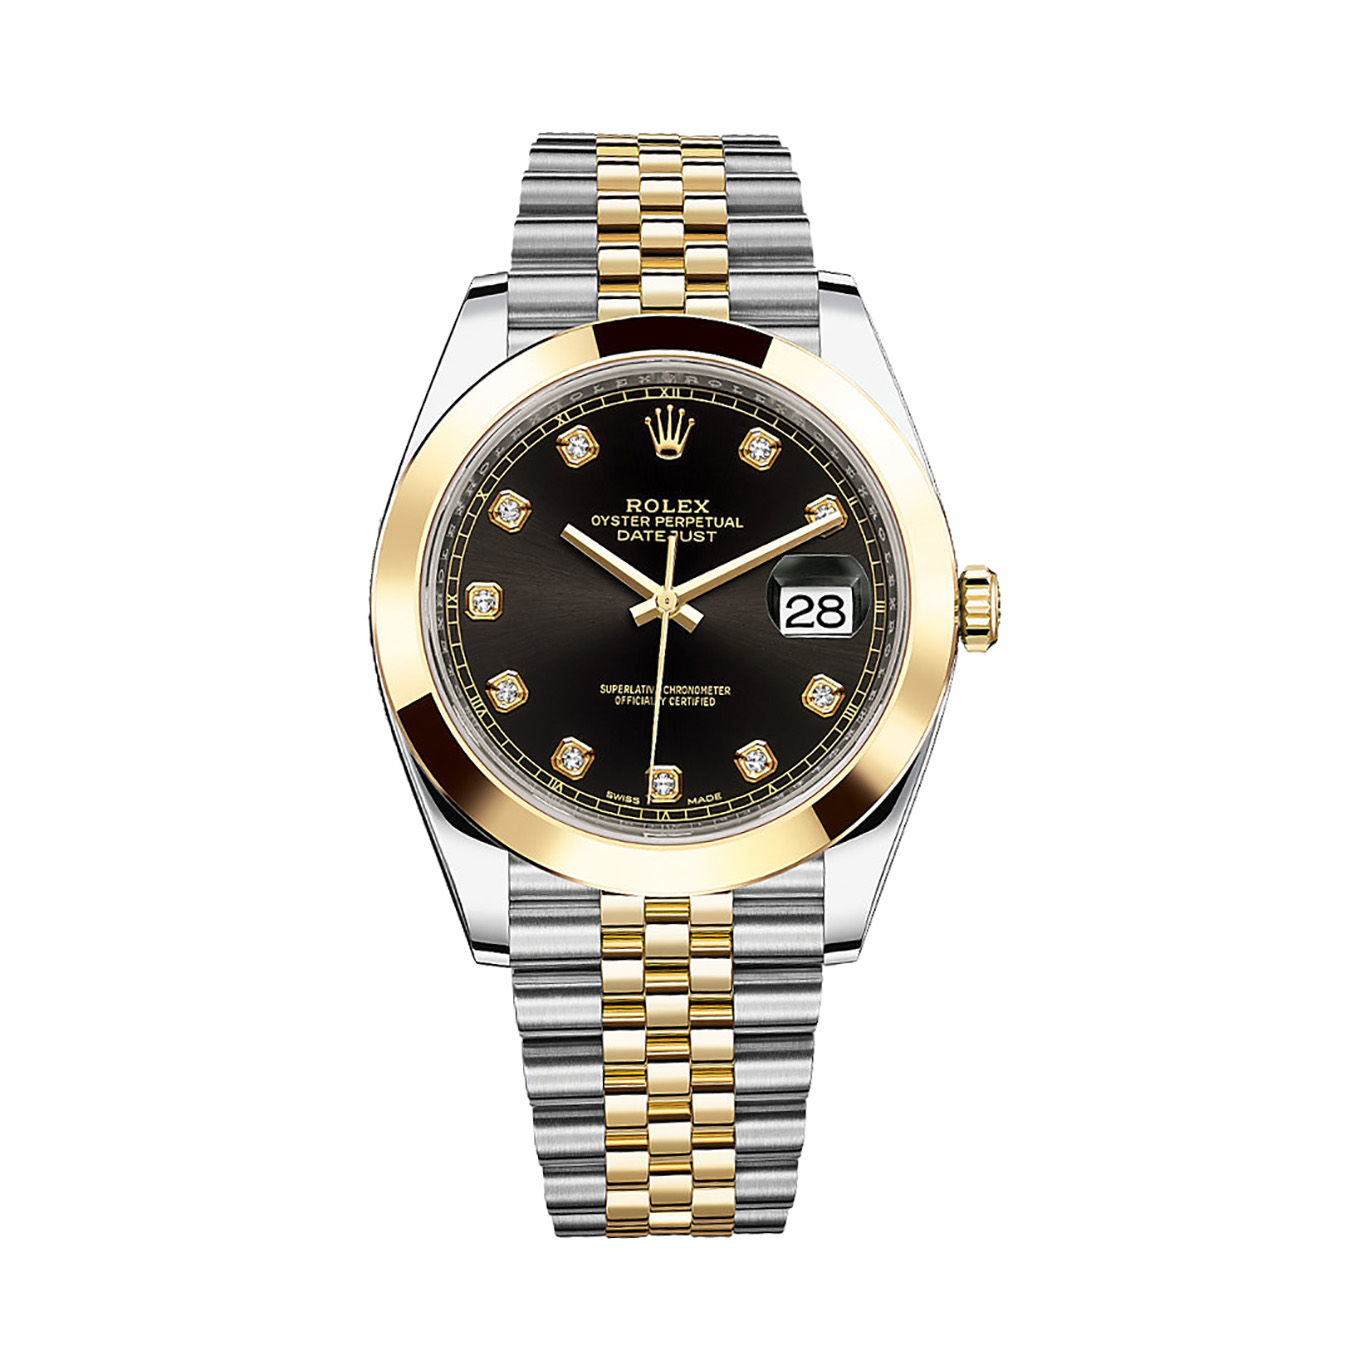 Datejust 41 126303 Gold & Stainless Steel Watch (Black Set With Diamonds)